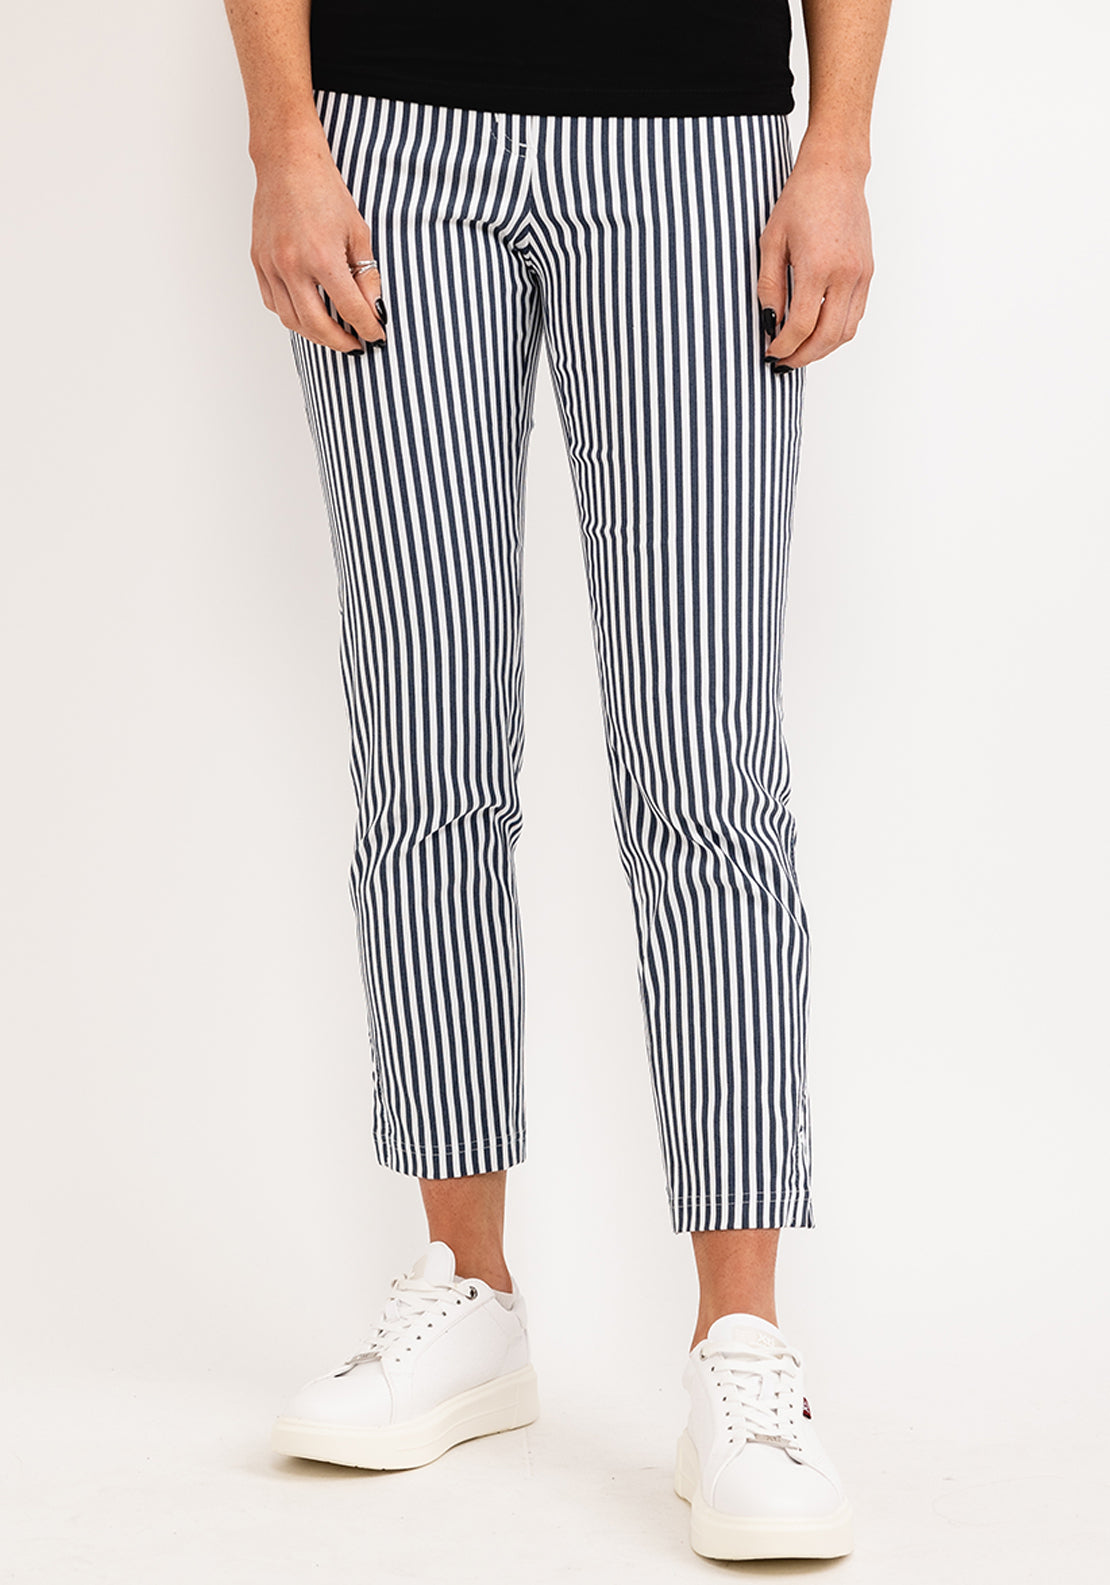 Robell Bella Pinstripe Ankle Grazer Trousers in Blue and White